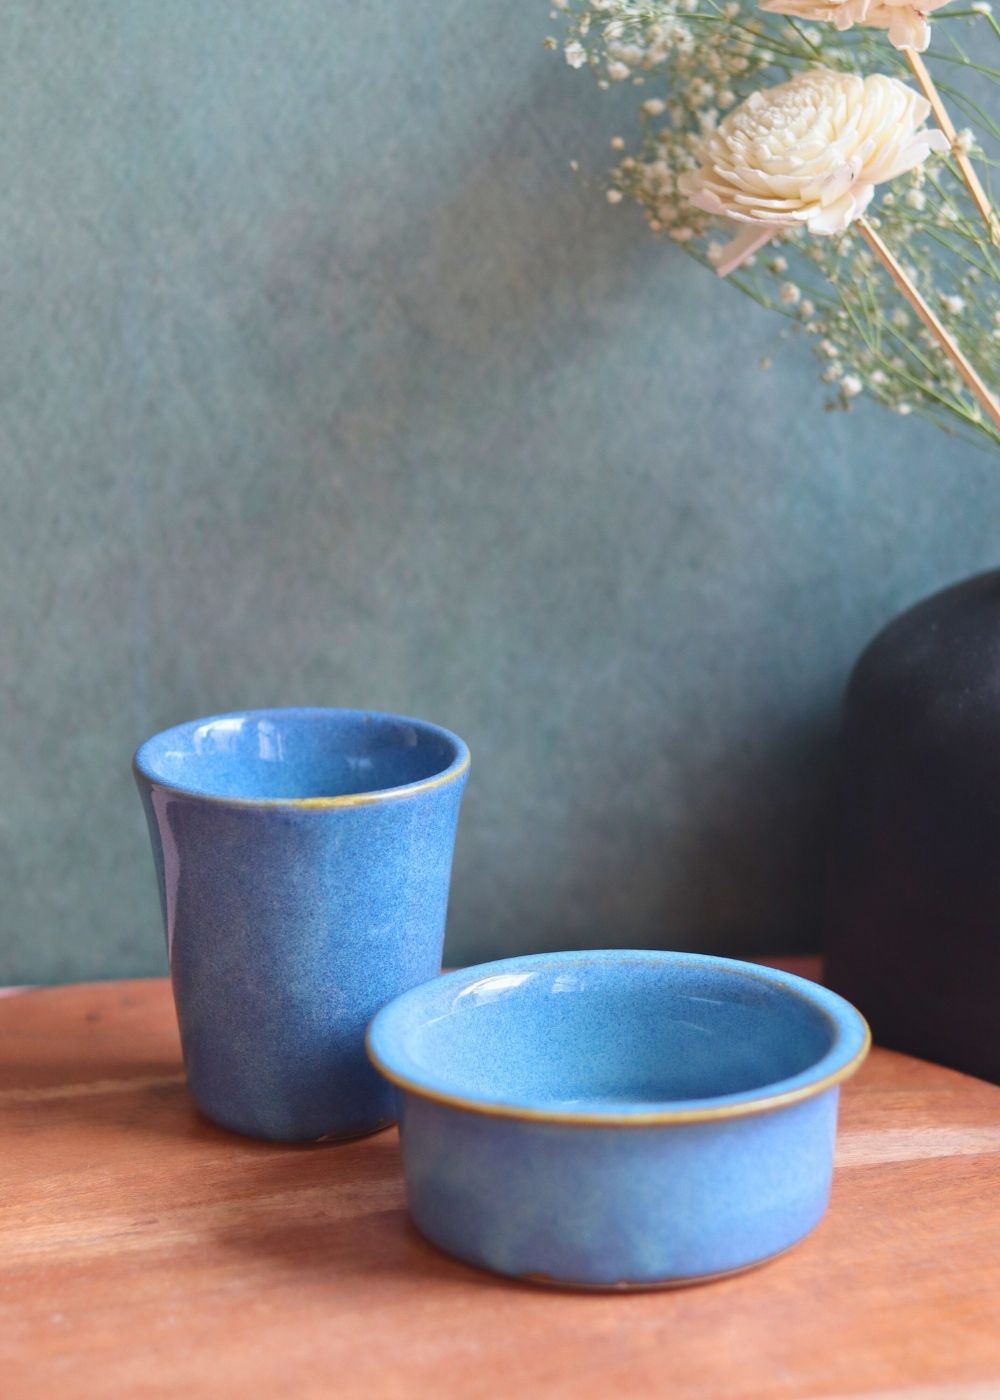 Auro blue dabara set for your perfect coffee filter